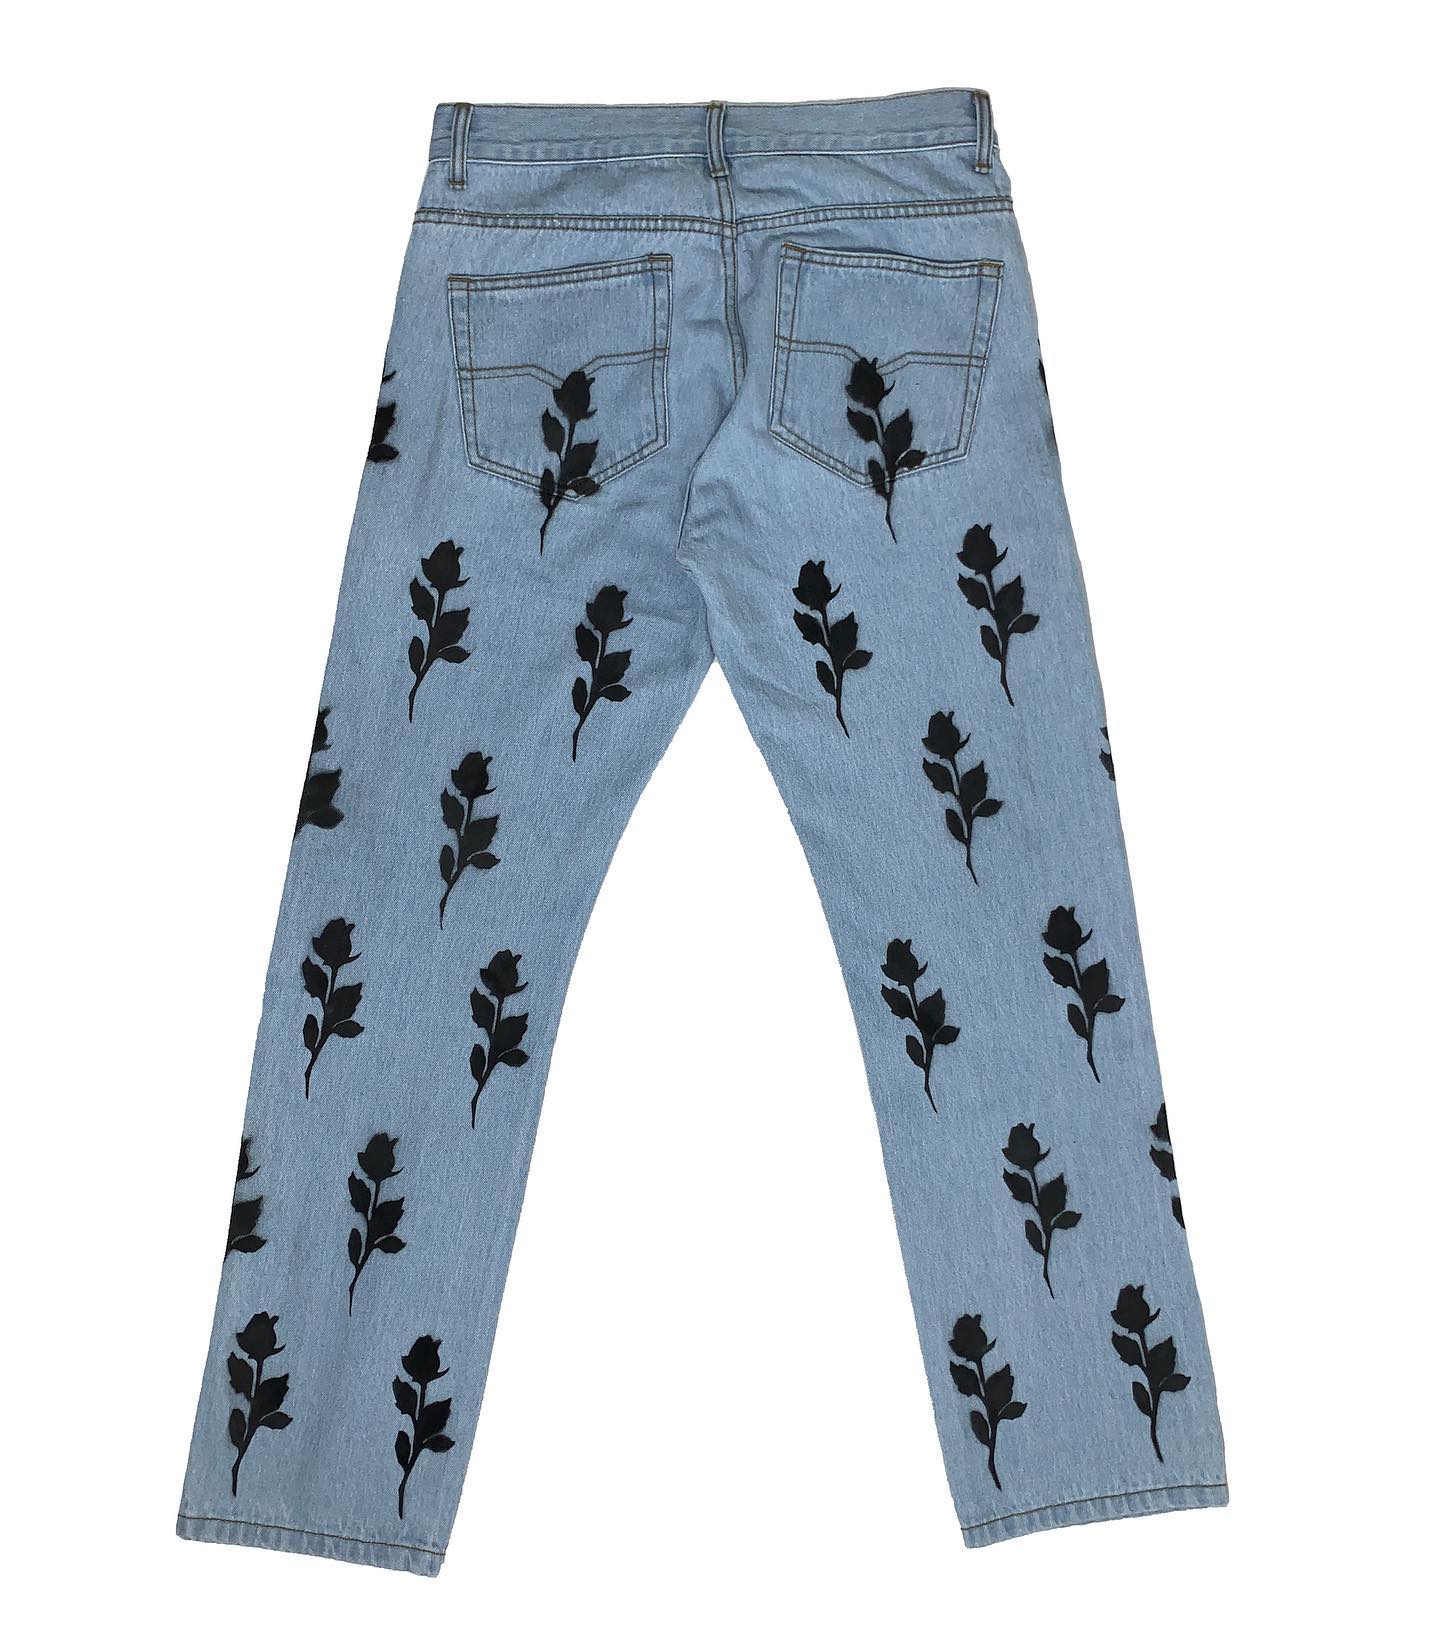 Personalized retro rose jeans